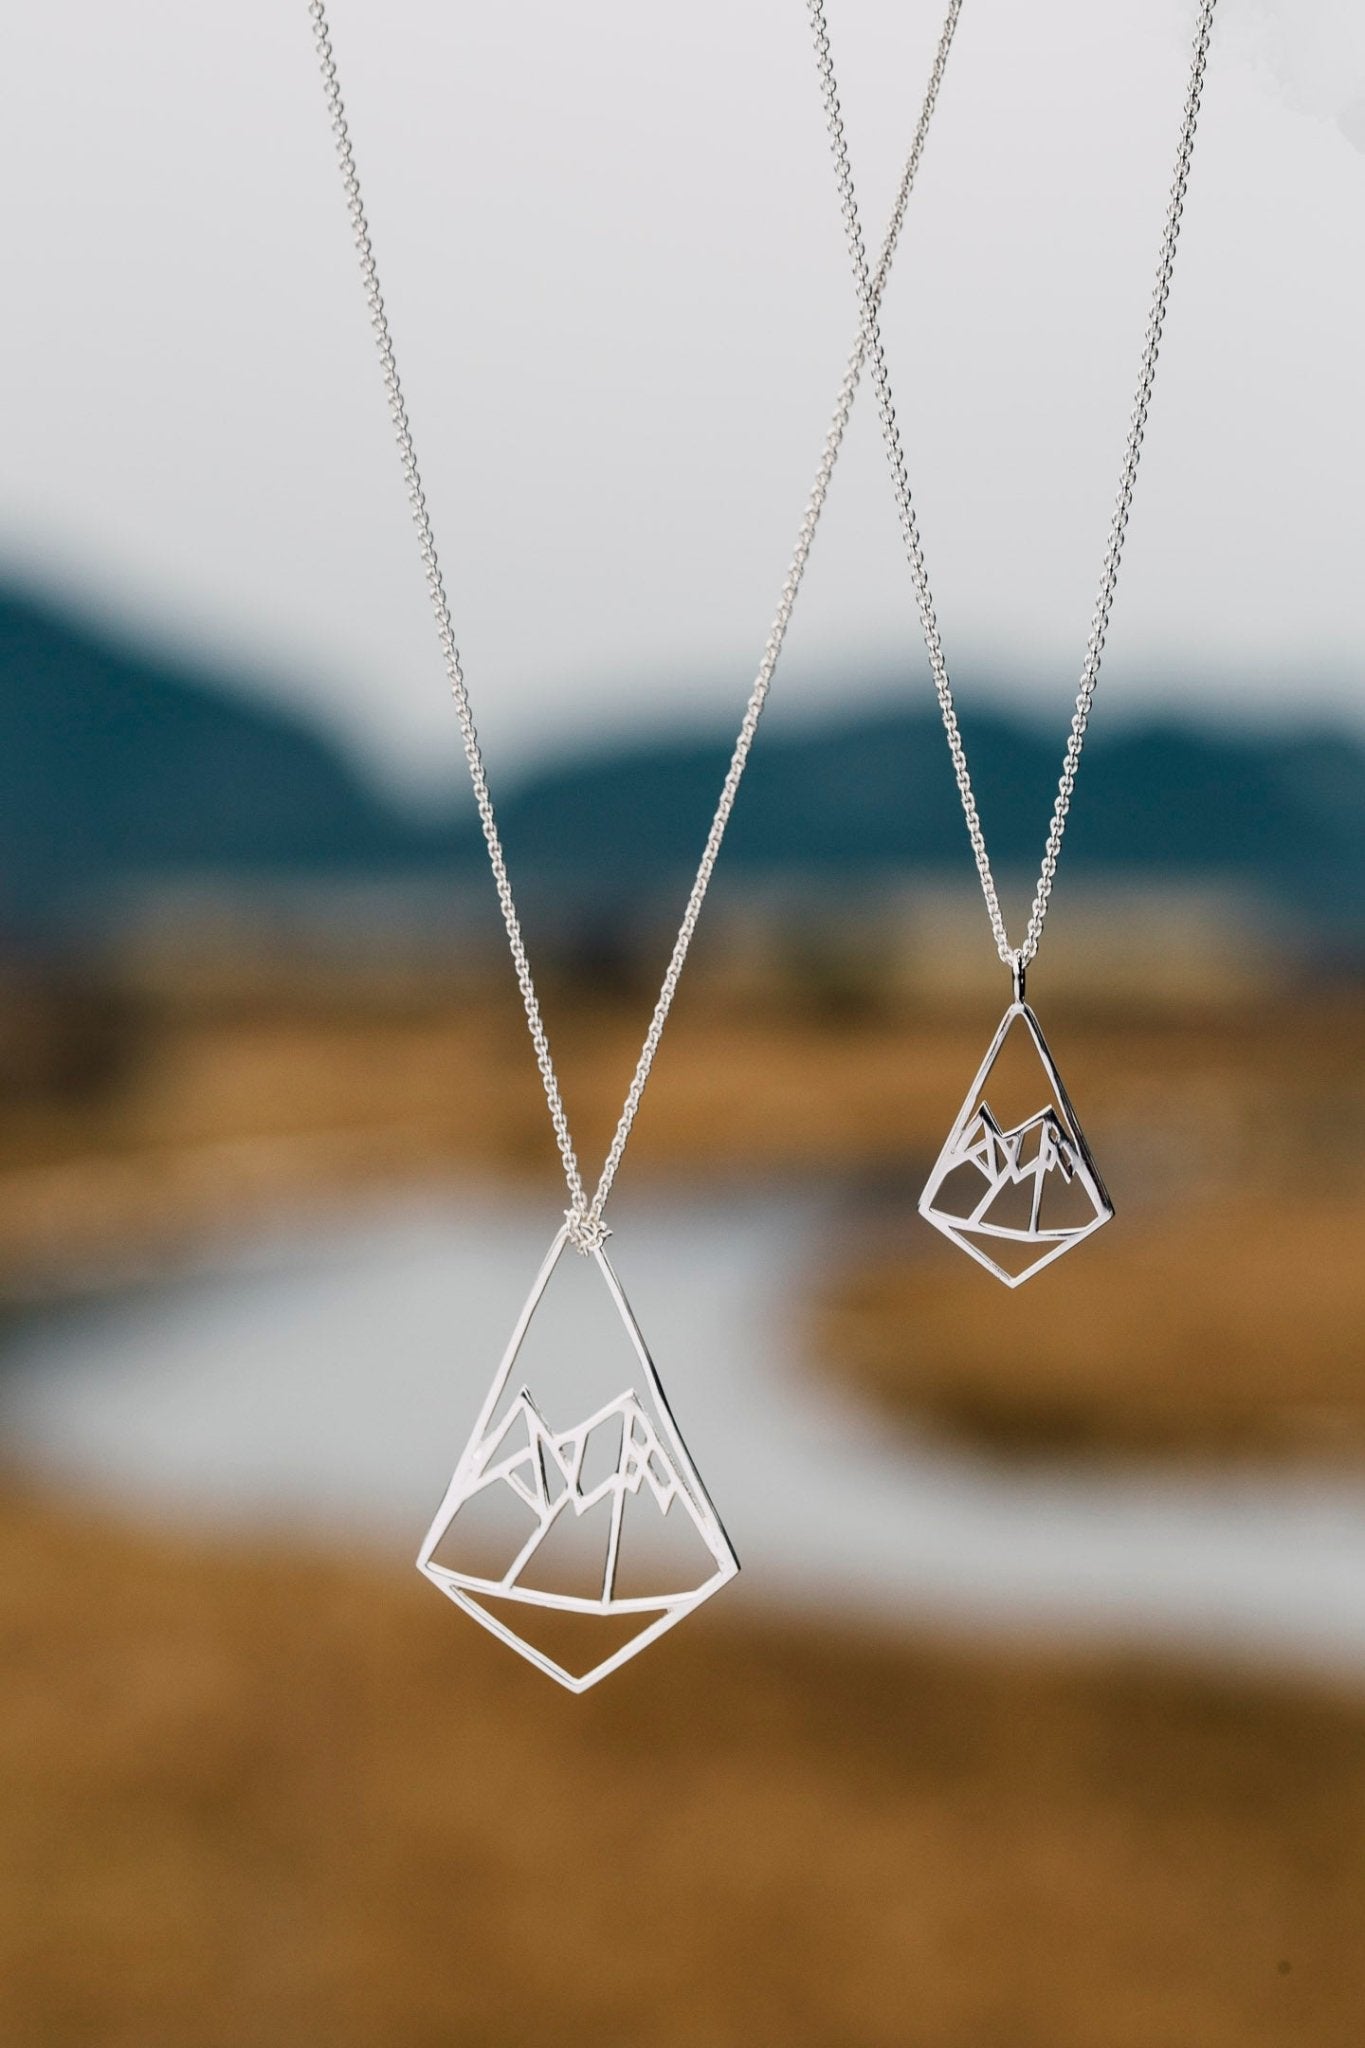 Large and small Geo Mountain pendant necklaces shown against blurred river background